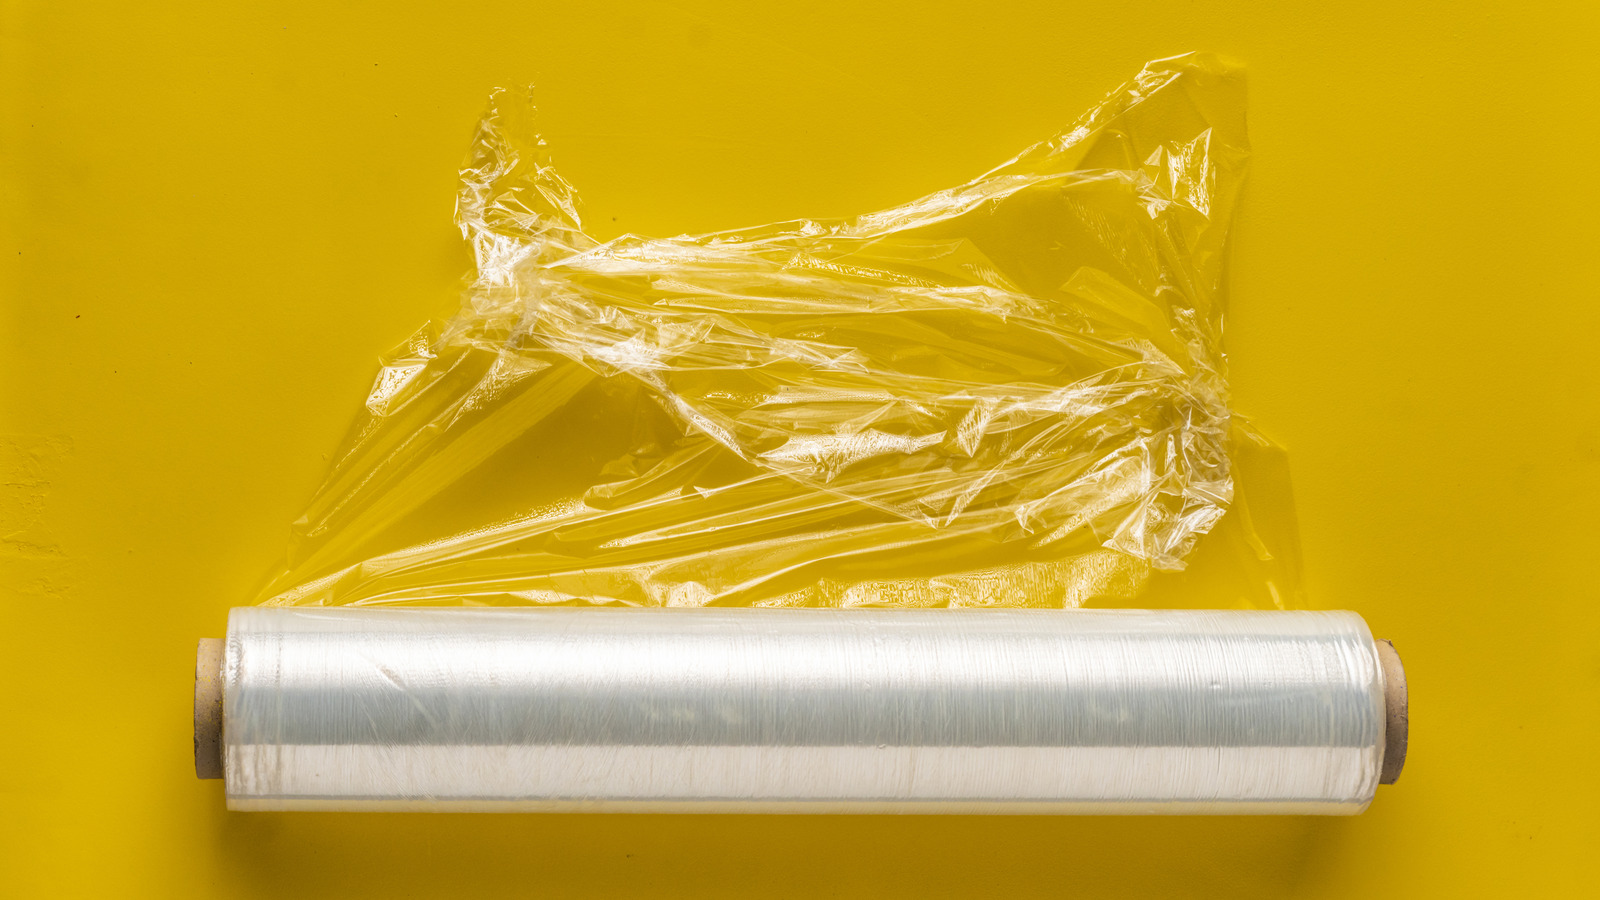 Food Packaging Wrap: Paper, Plastic, and Foil Food Wrap